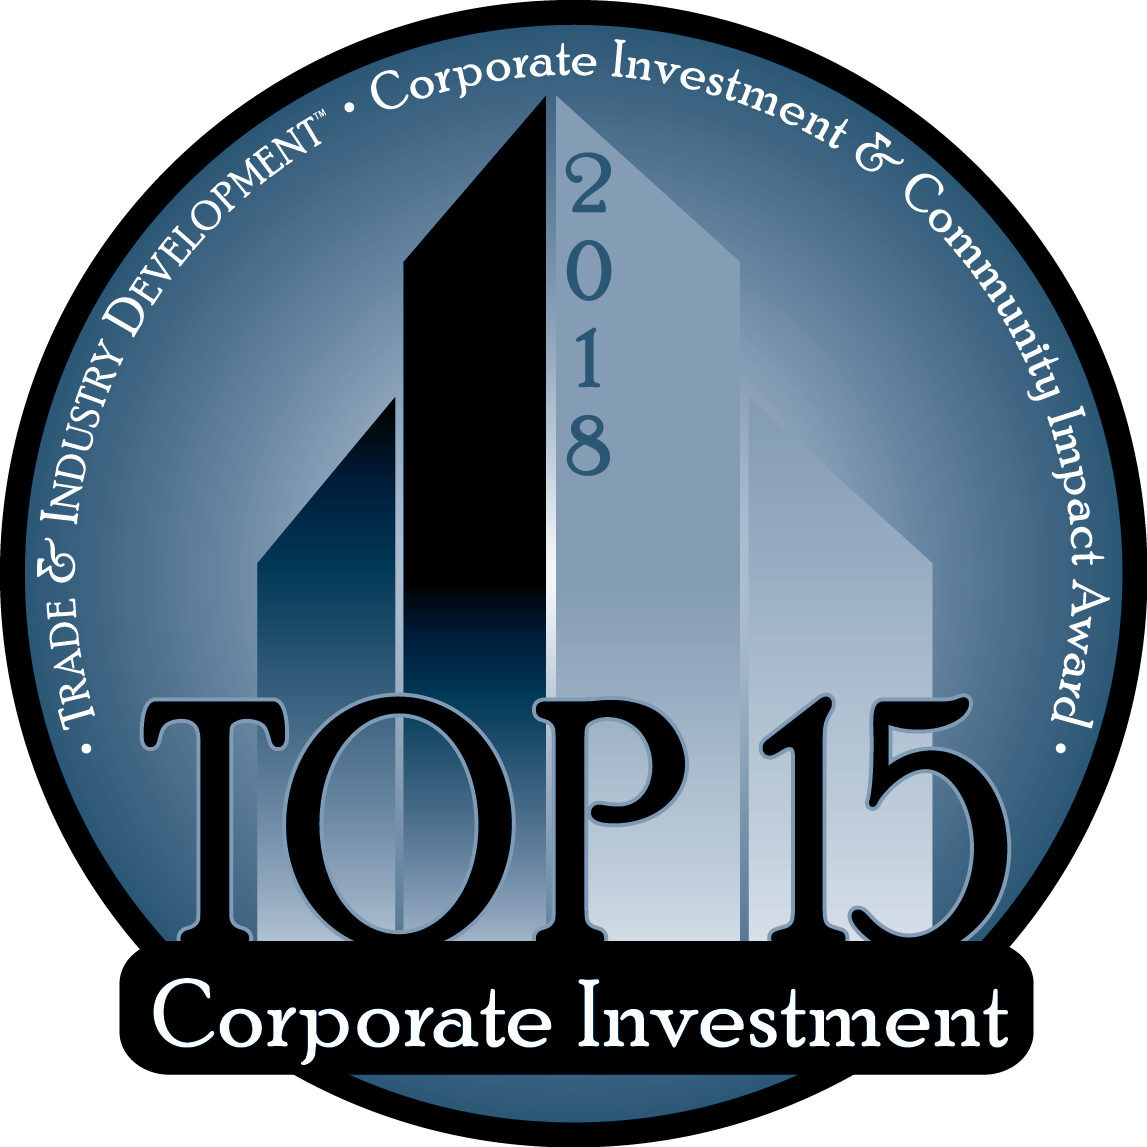 CiCi Corporate Investment Awards